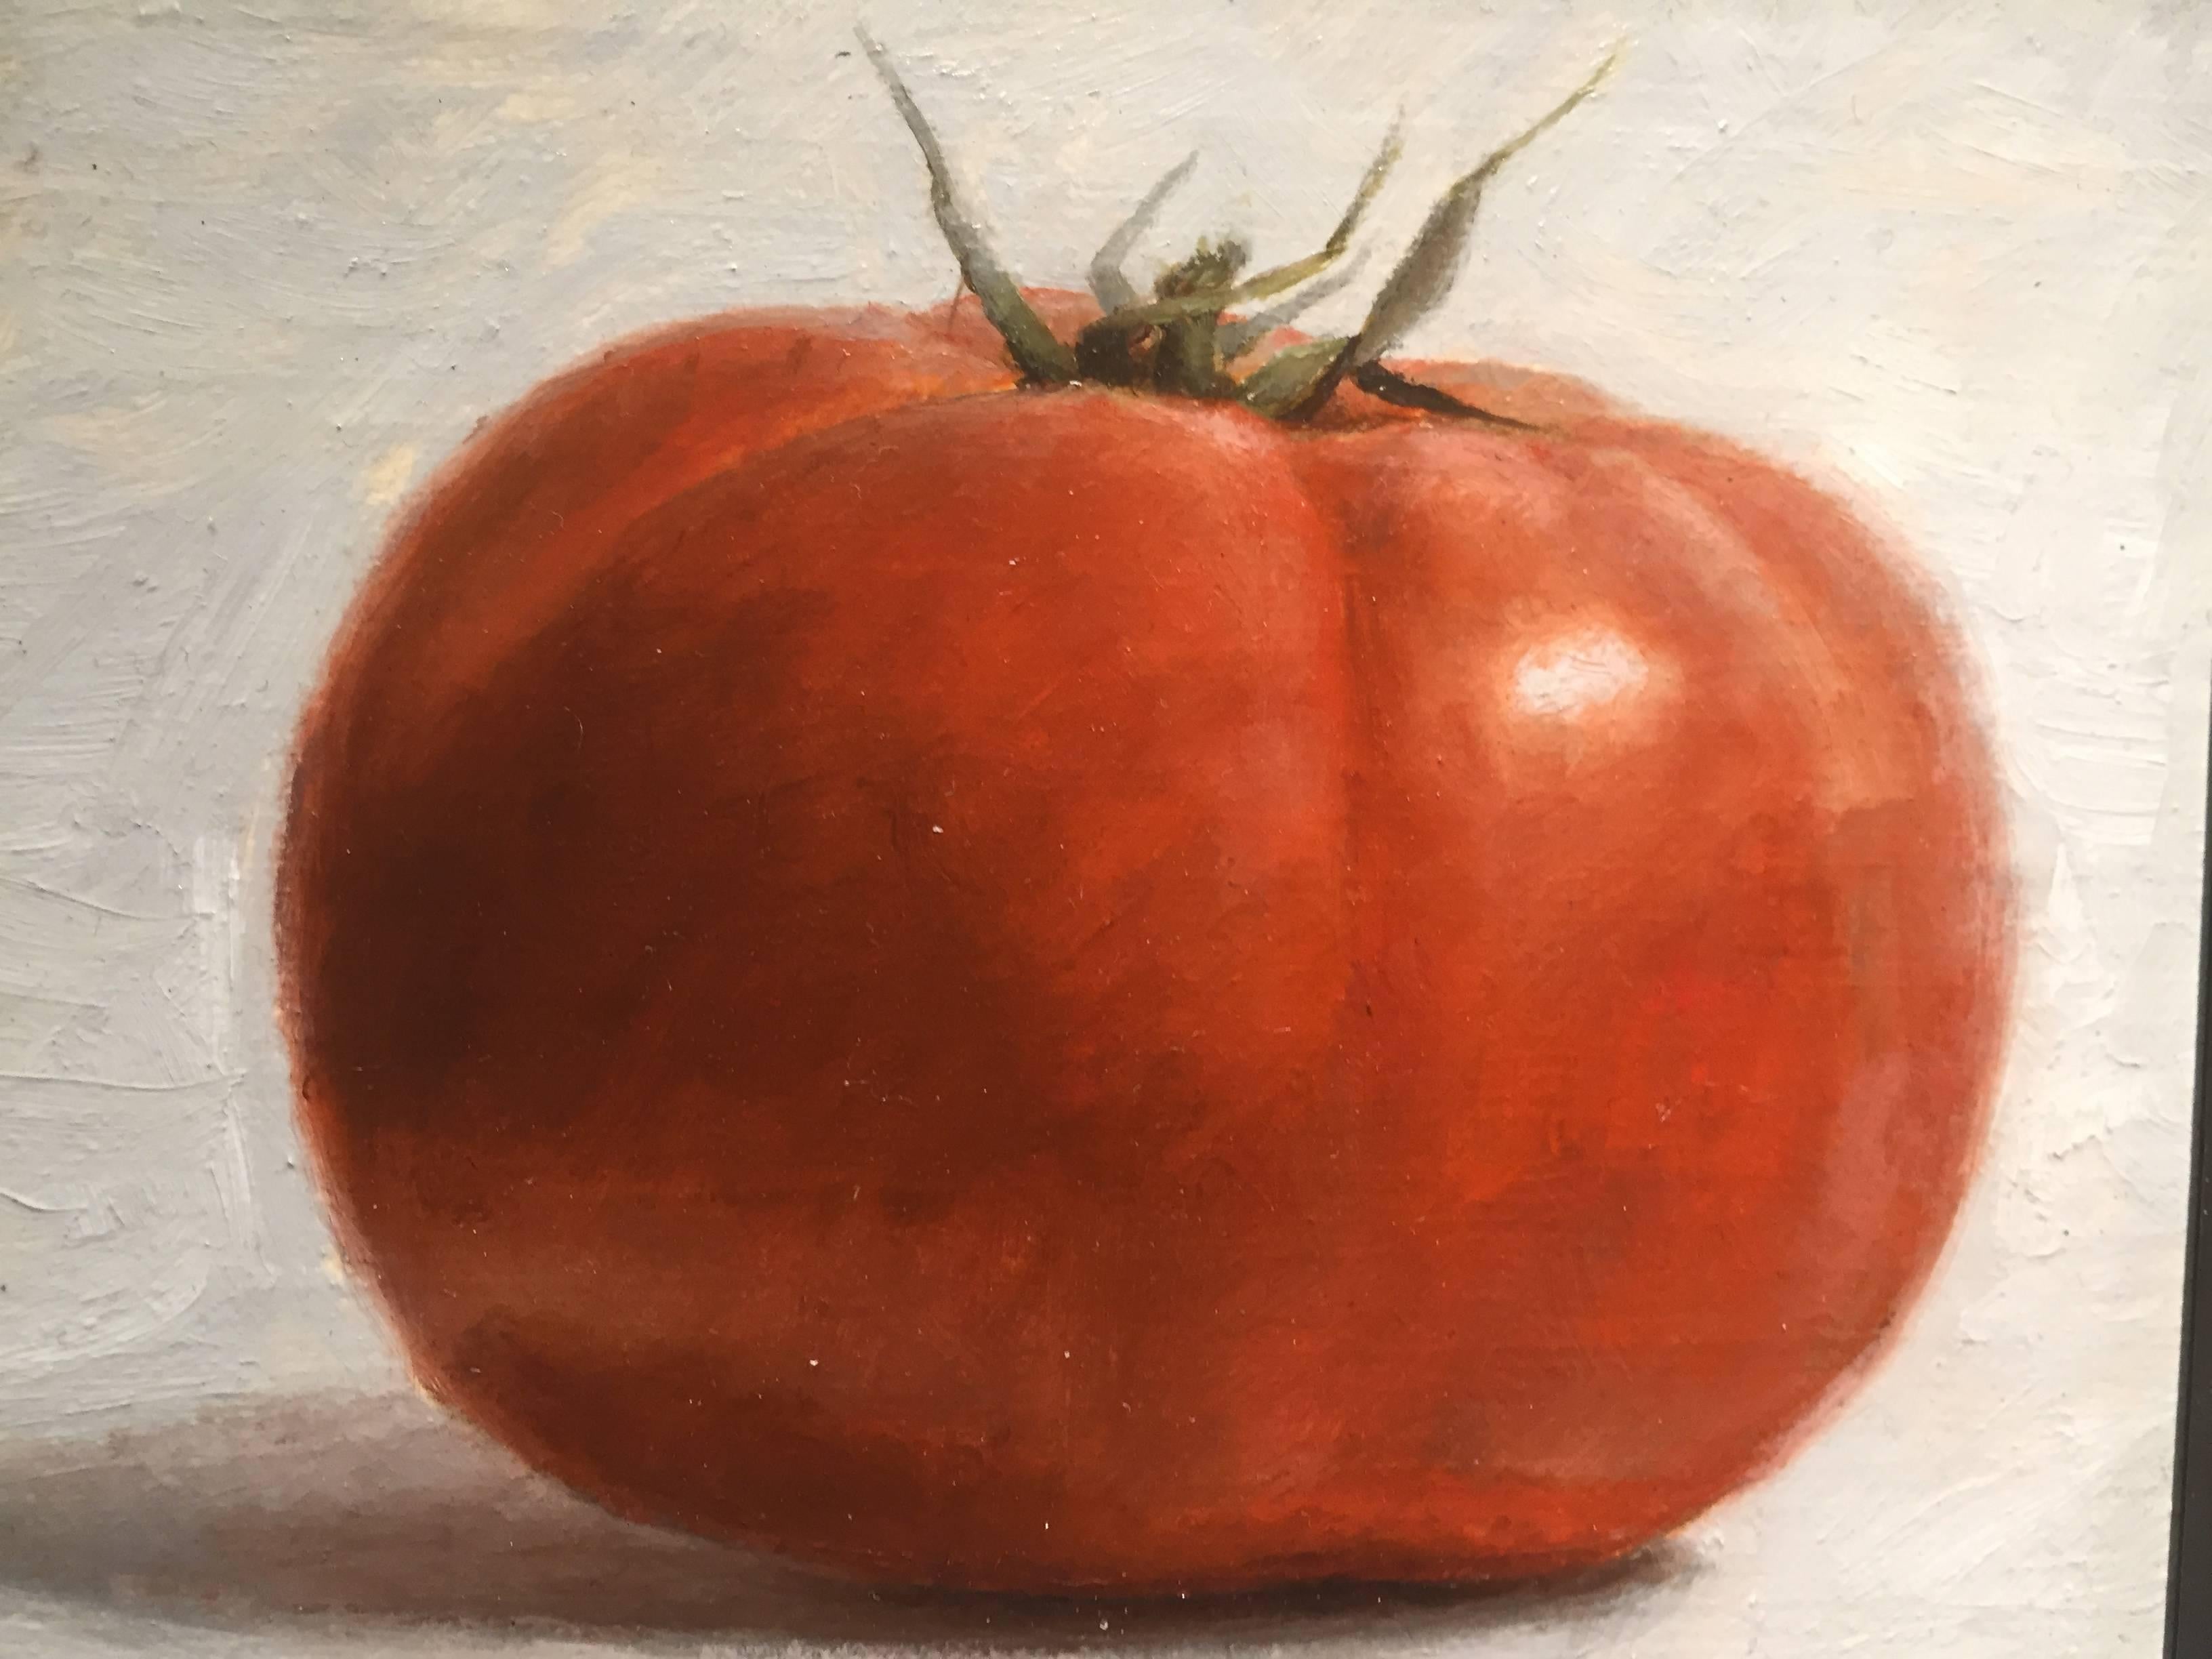 Uncle Teds Tomatoes - American Realist Painting by John Morfis